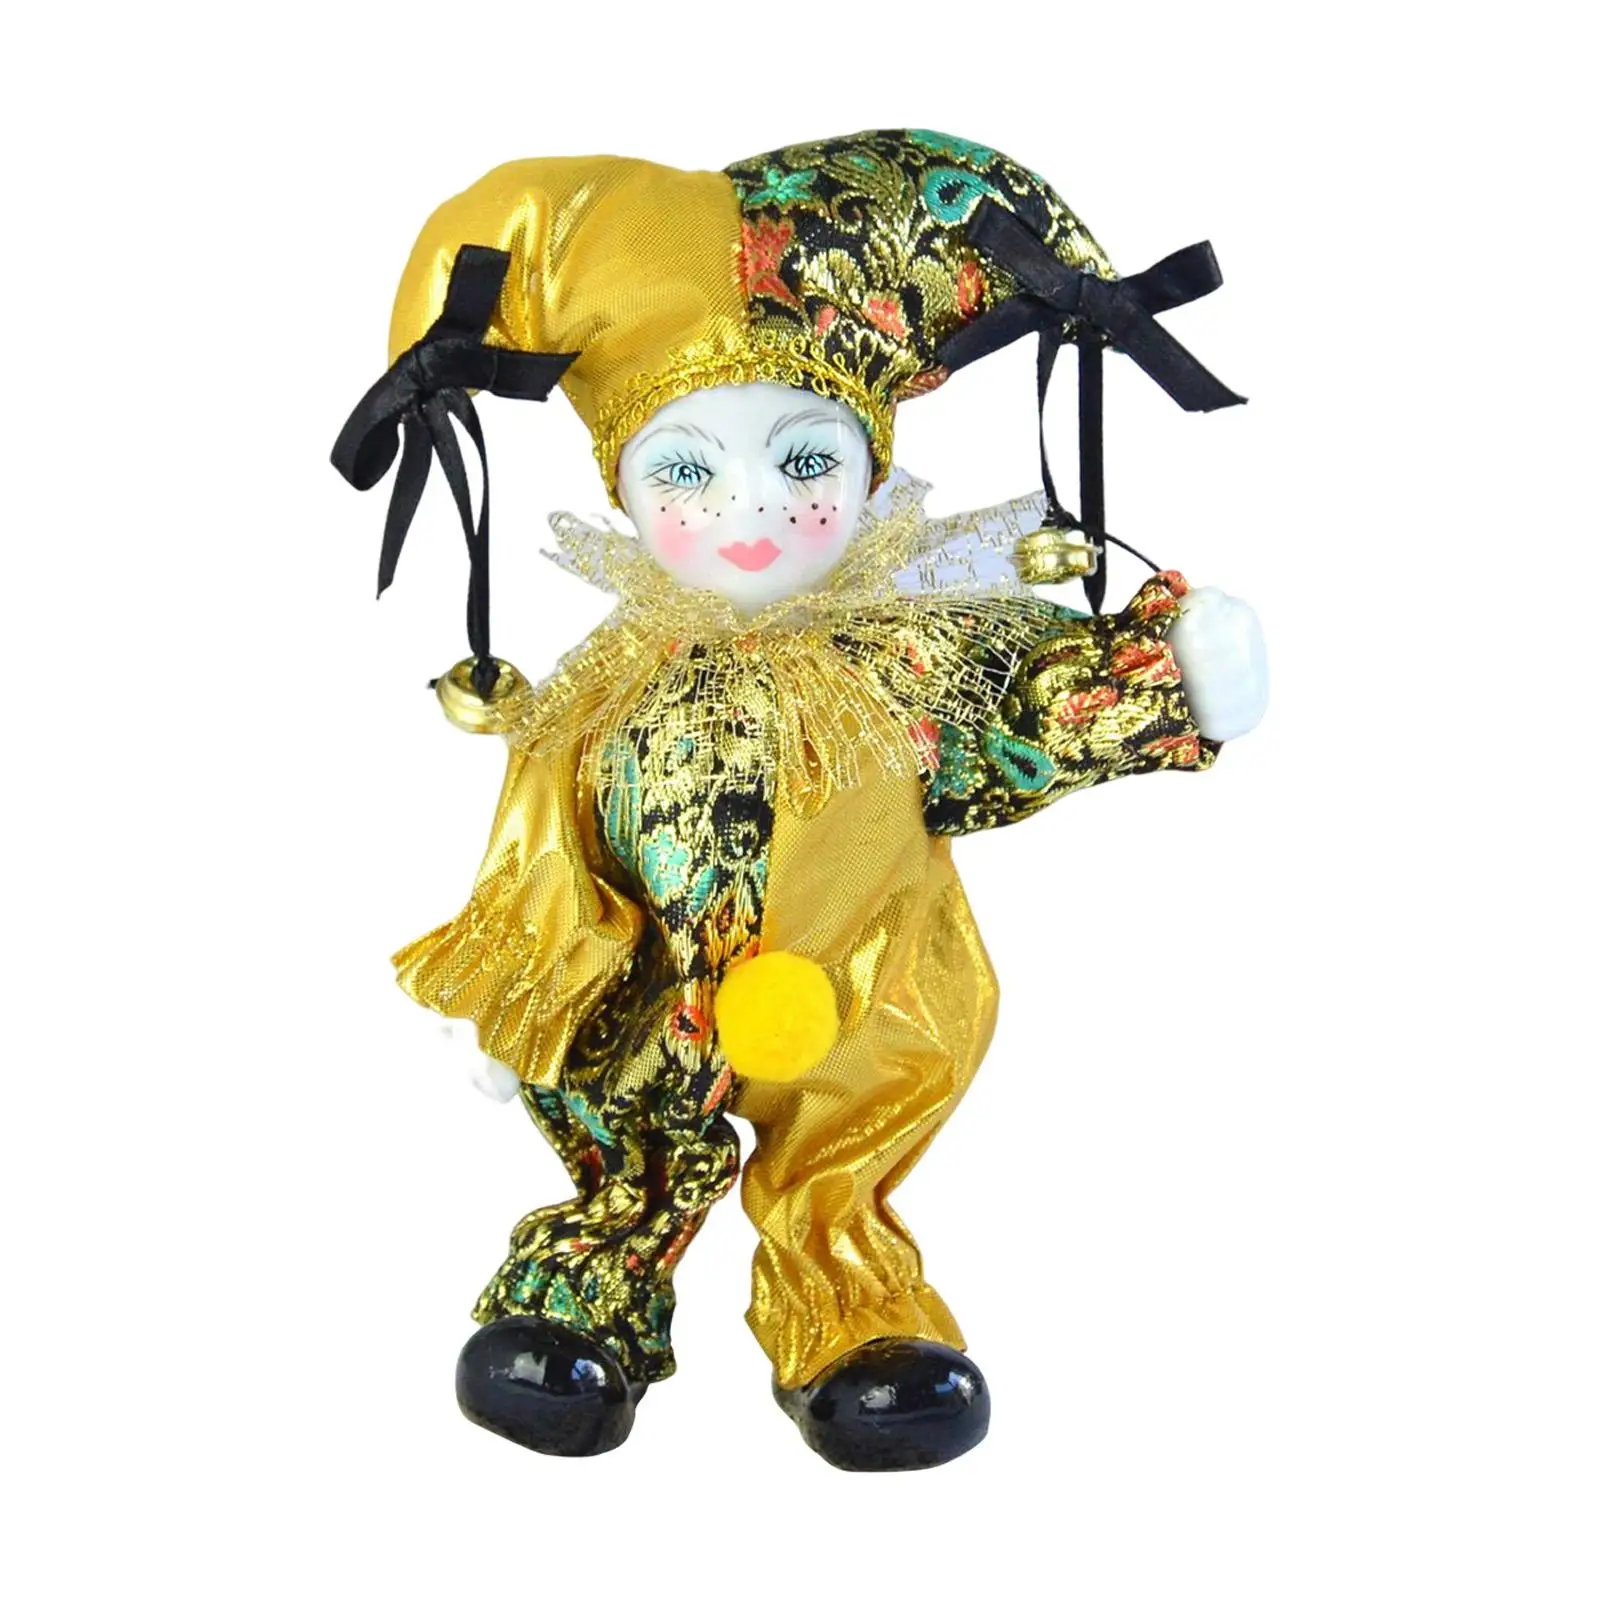 Triangel Doll Small Clown Doll Porcelain Doll Figurine Crafts for Game Prop